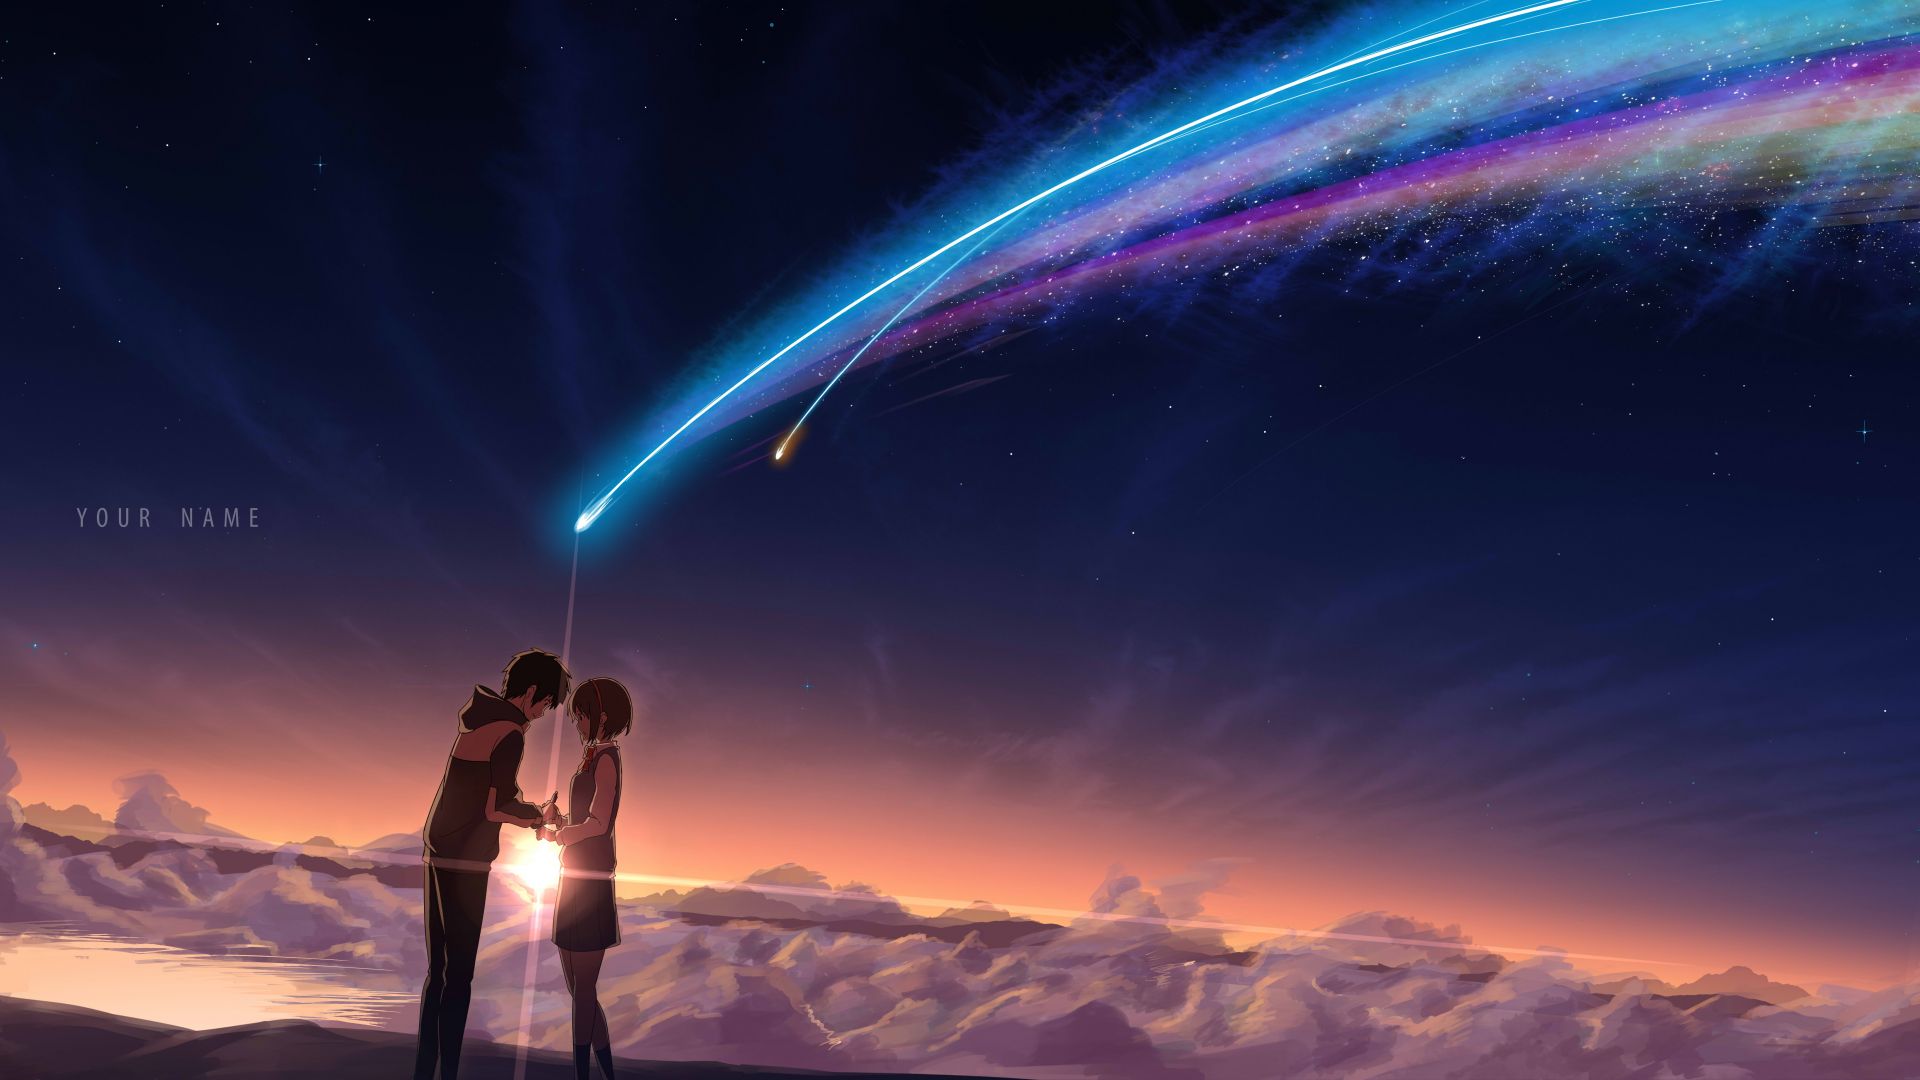 Your Name 4K 2016 big poster